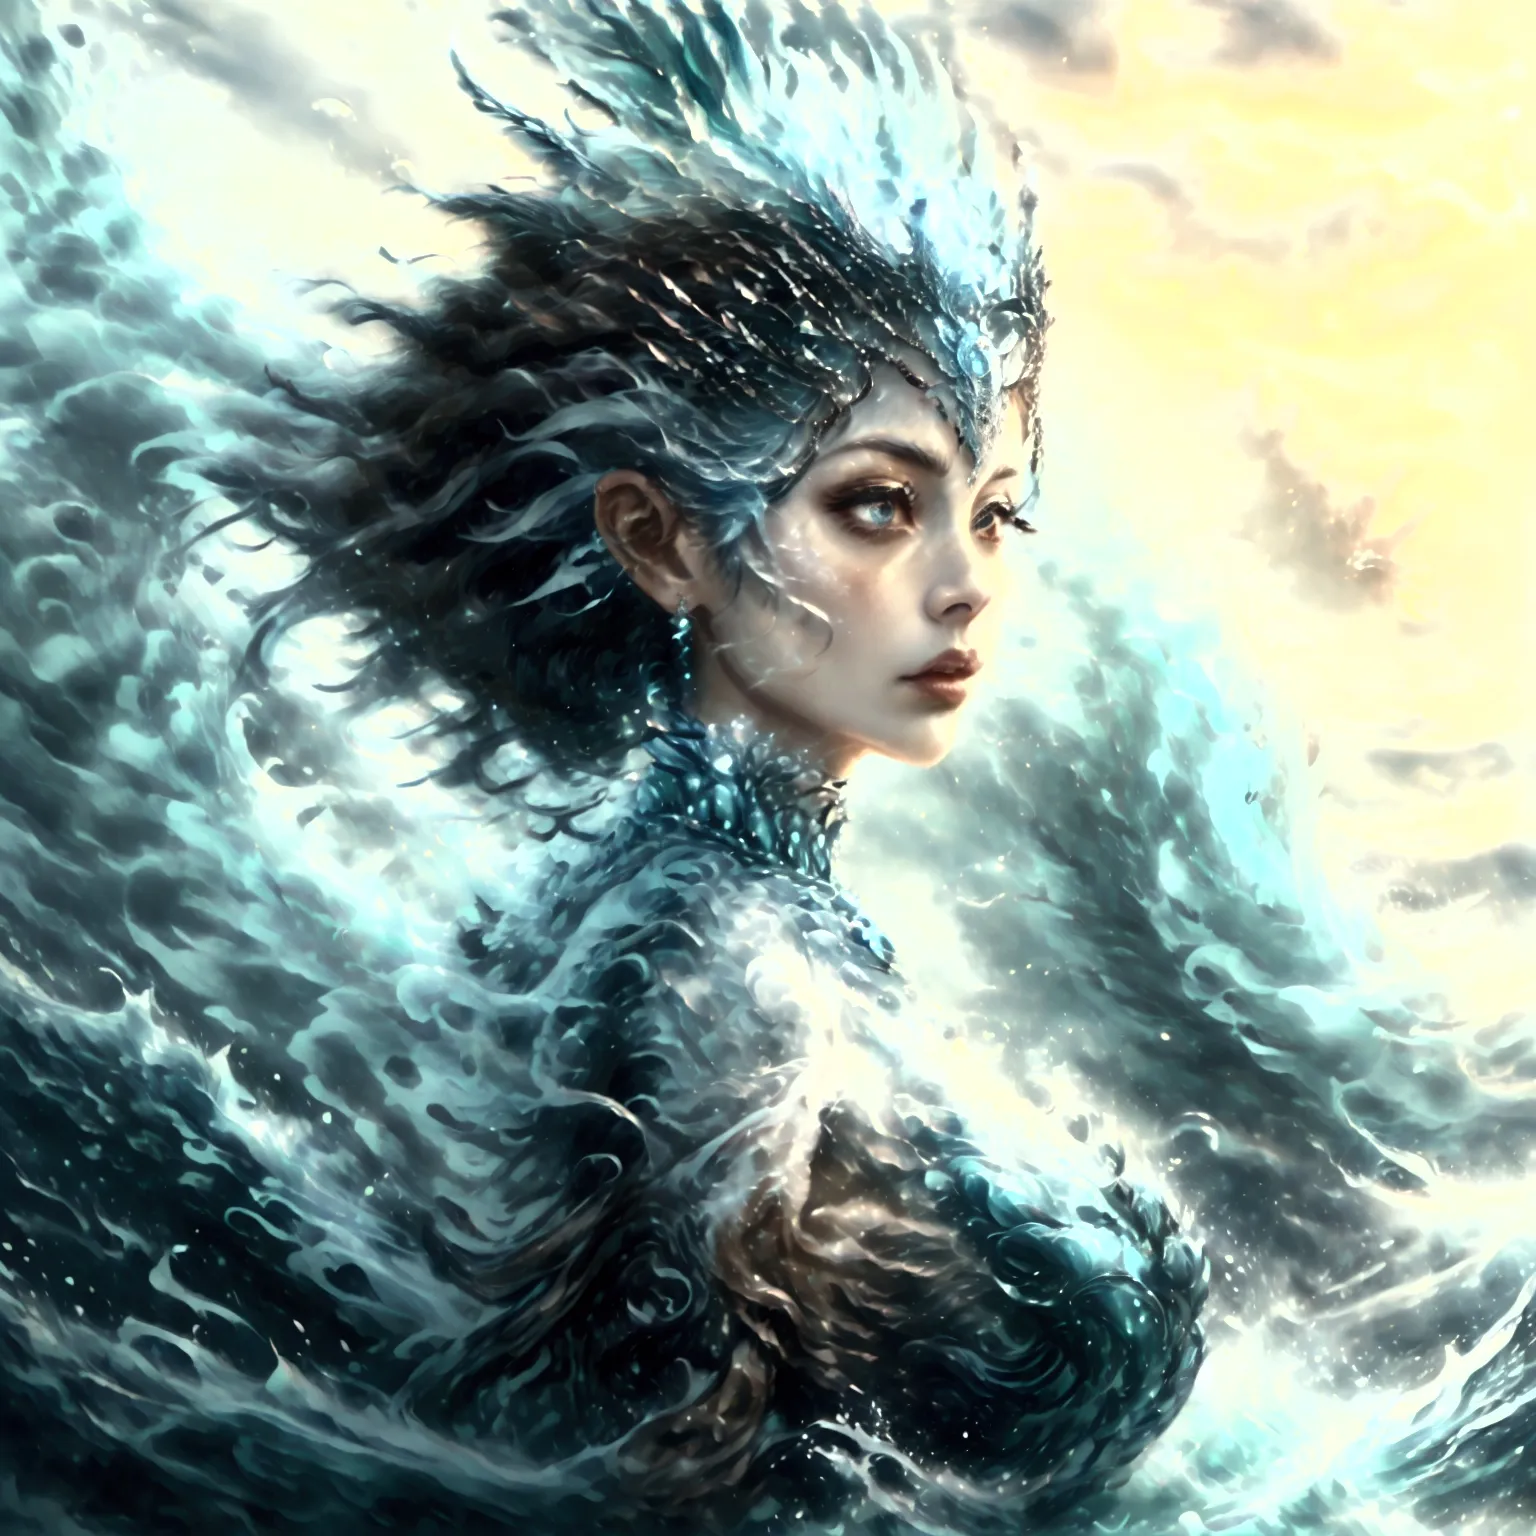 Design an anime-style character named Nami, styled as 'Ocean Empress.' Nami should have a regal and commanding expression, with ...